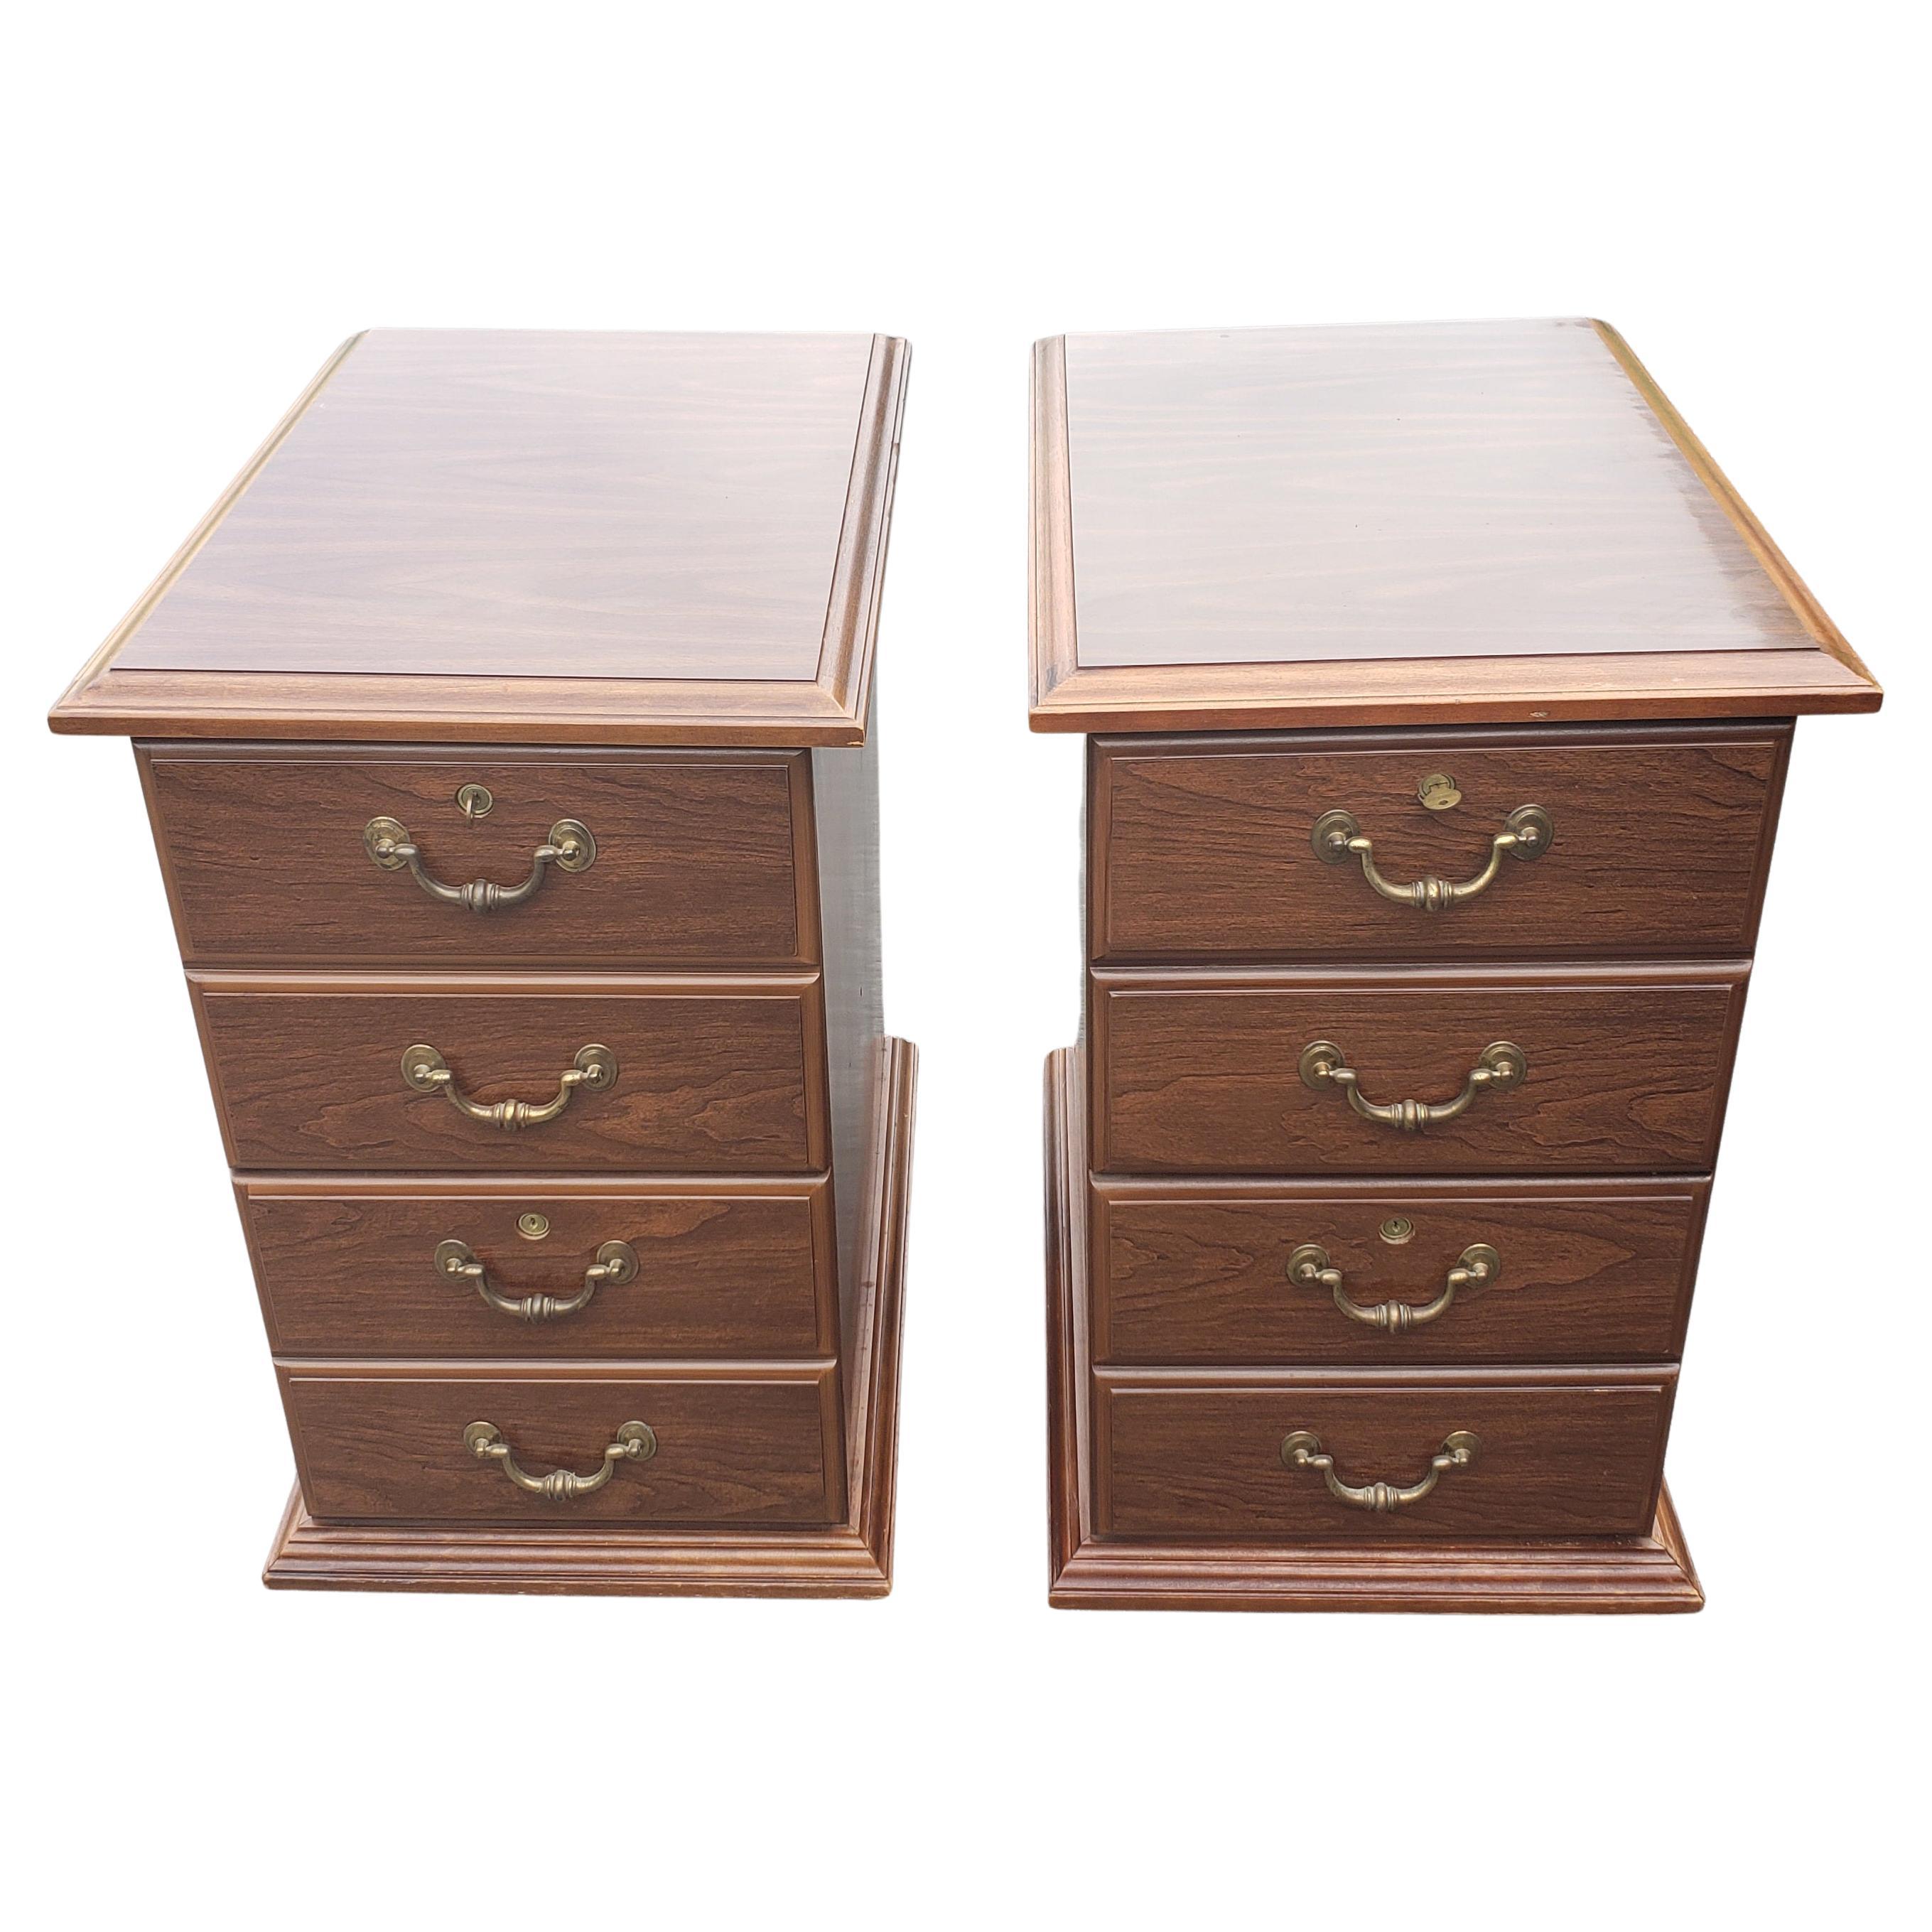 Striking two-drawer Chippendale filing cabinets in great condition. For both Legal and letter size hanging file folders. Comes with key. Each drawer independently locking. Measures 18.25